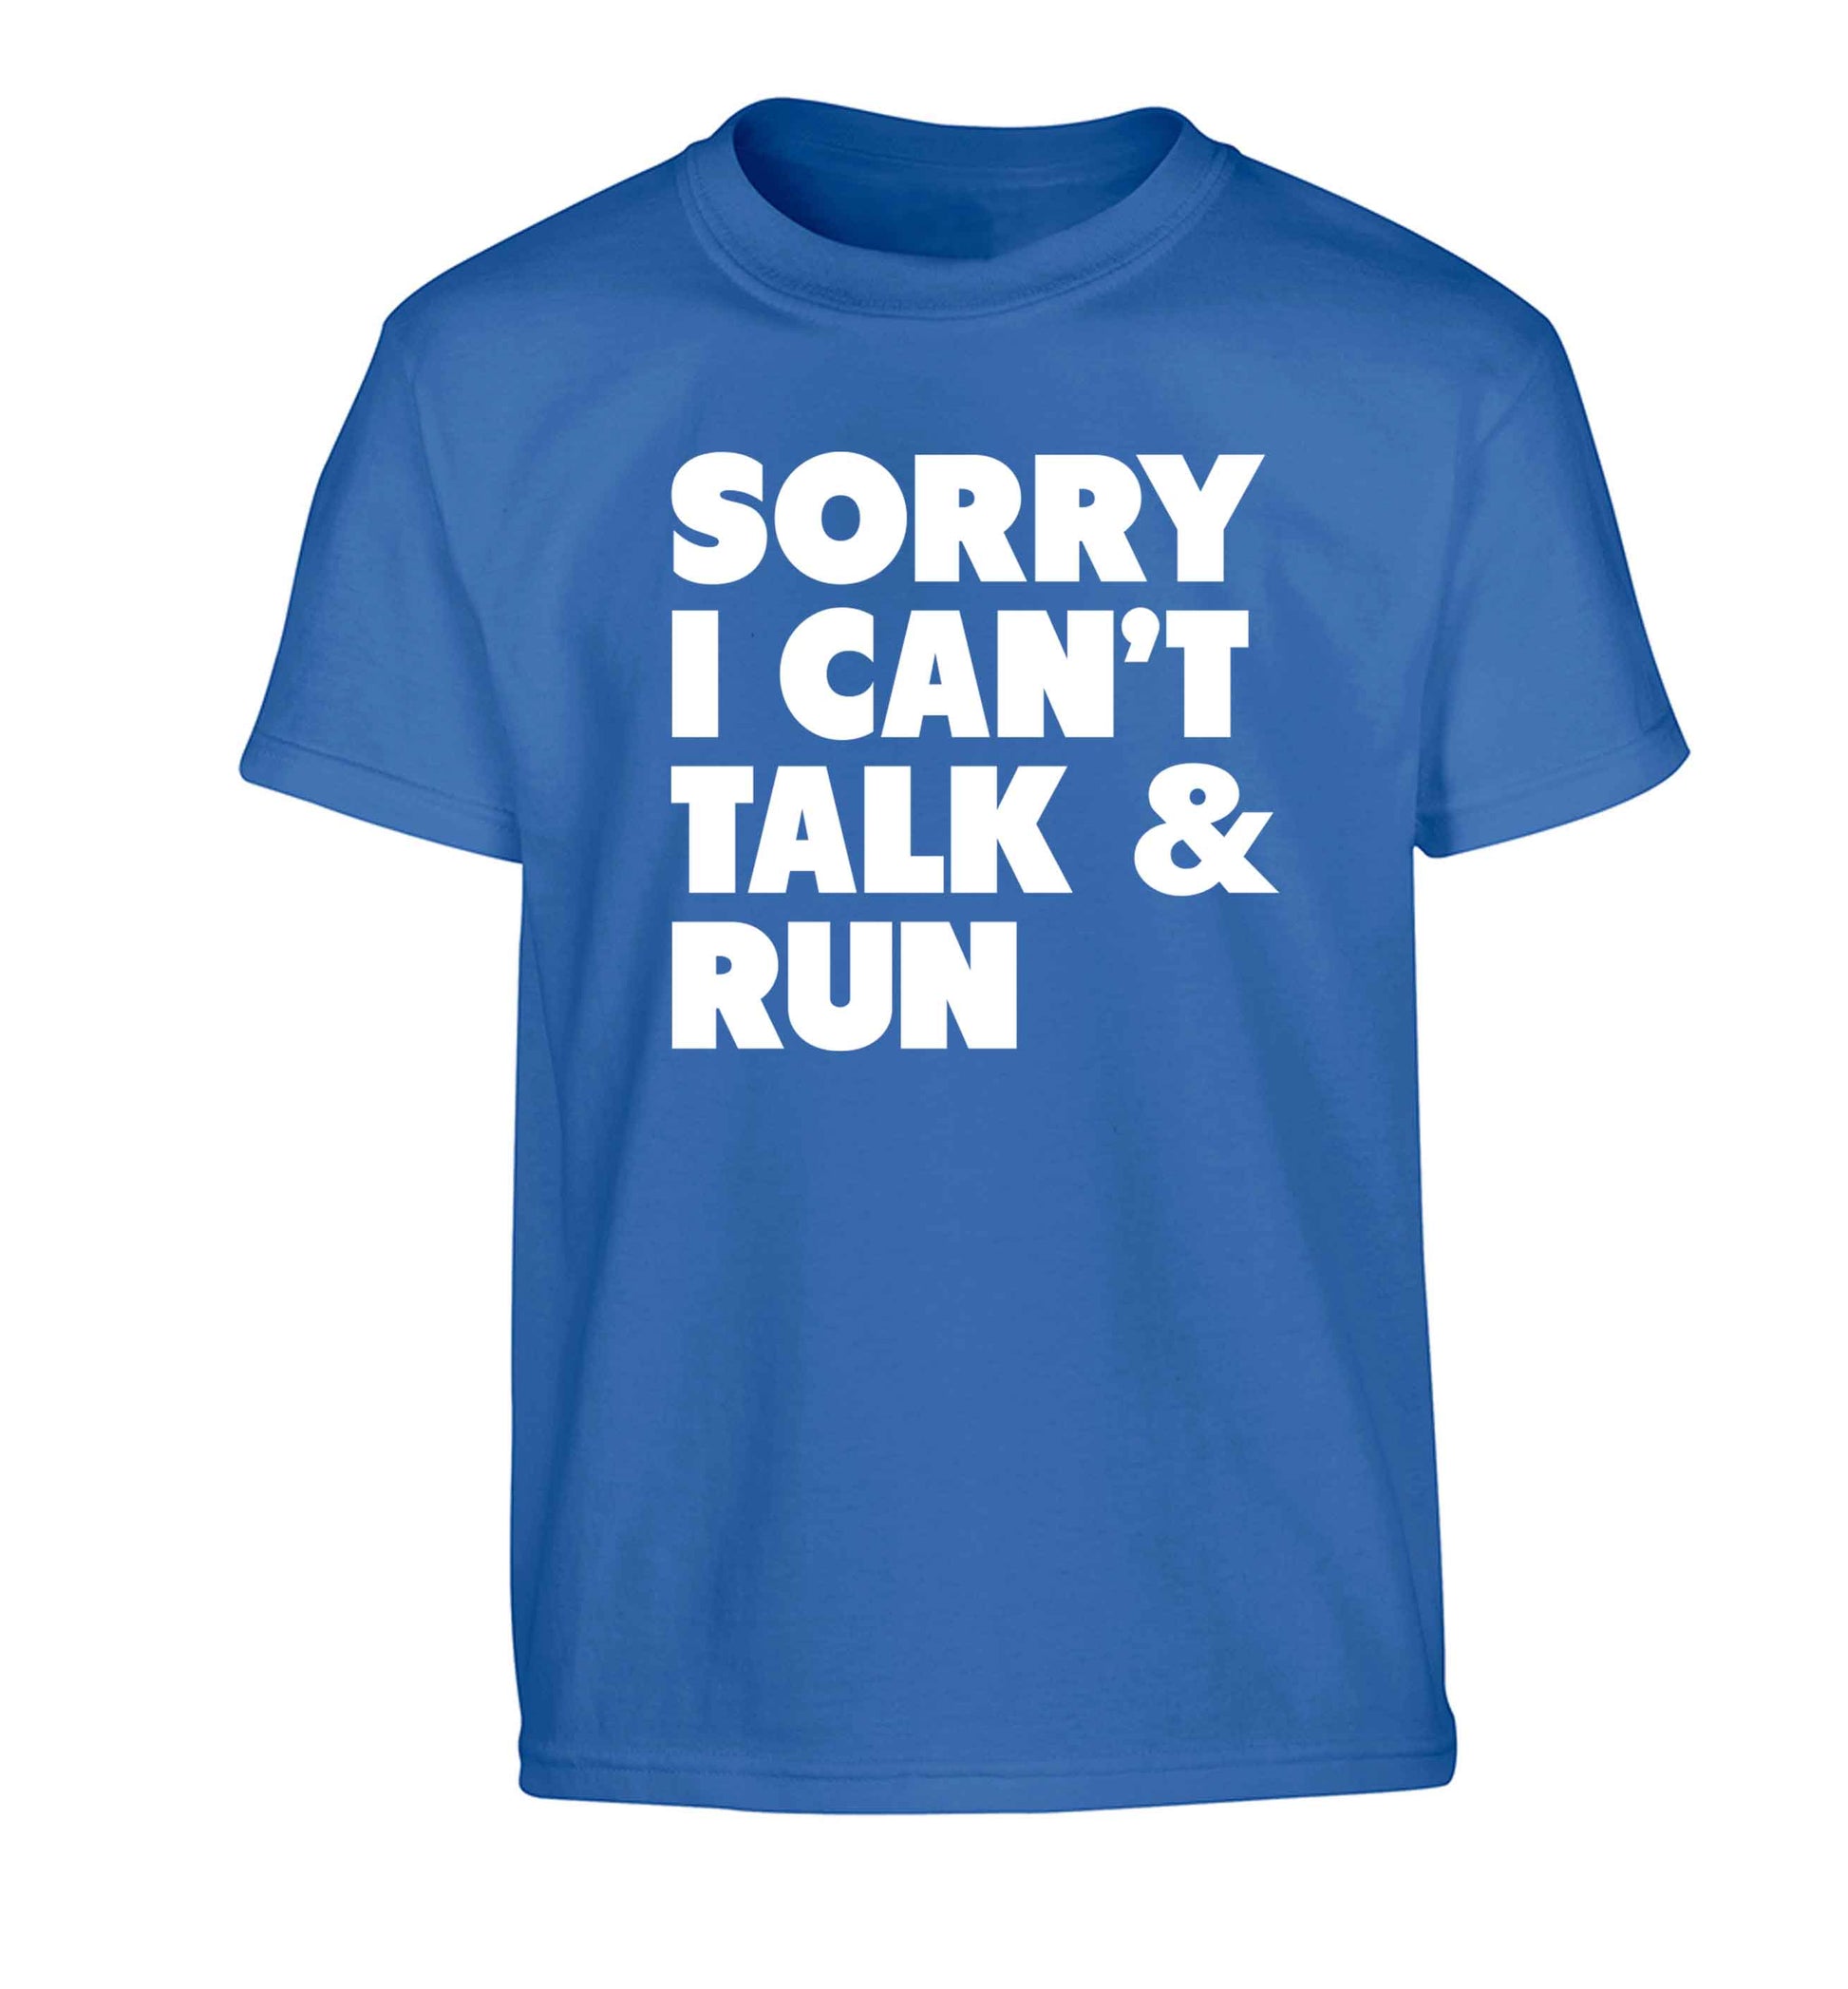 Sorry I can't talk and run Children's blue Tshirt 12-13 Years